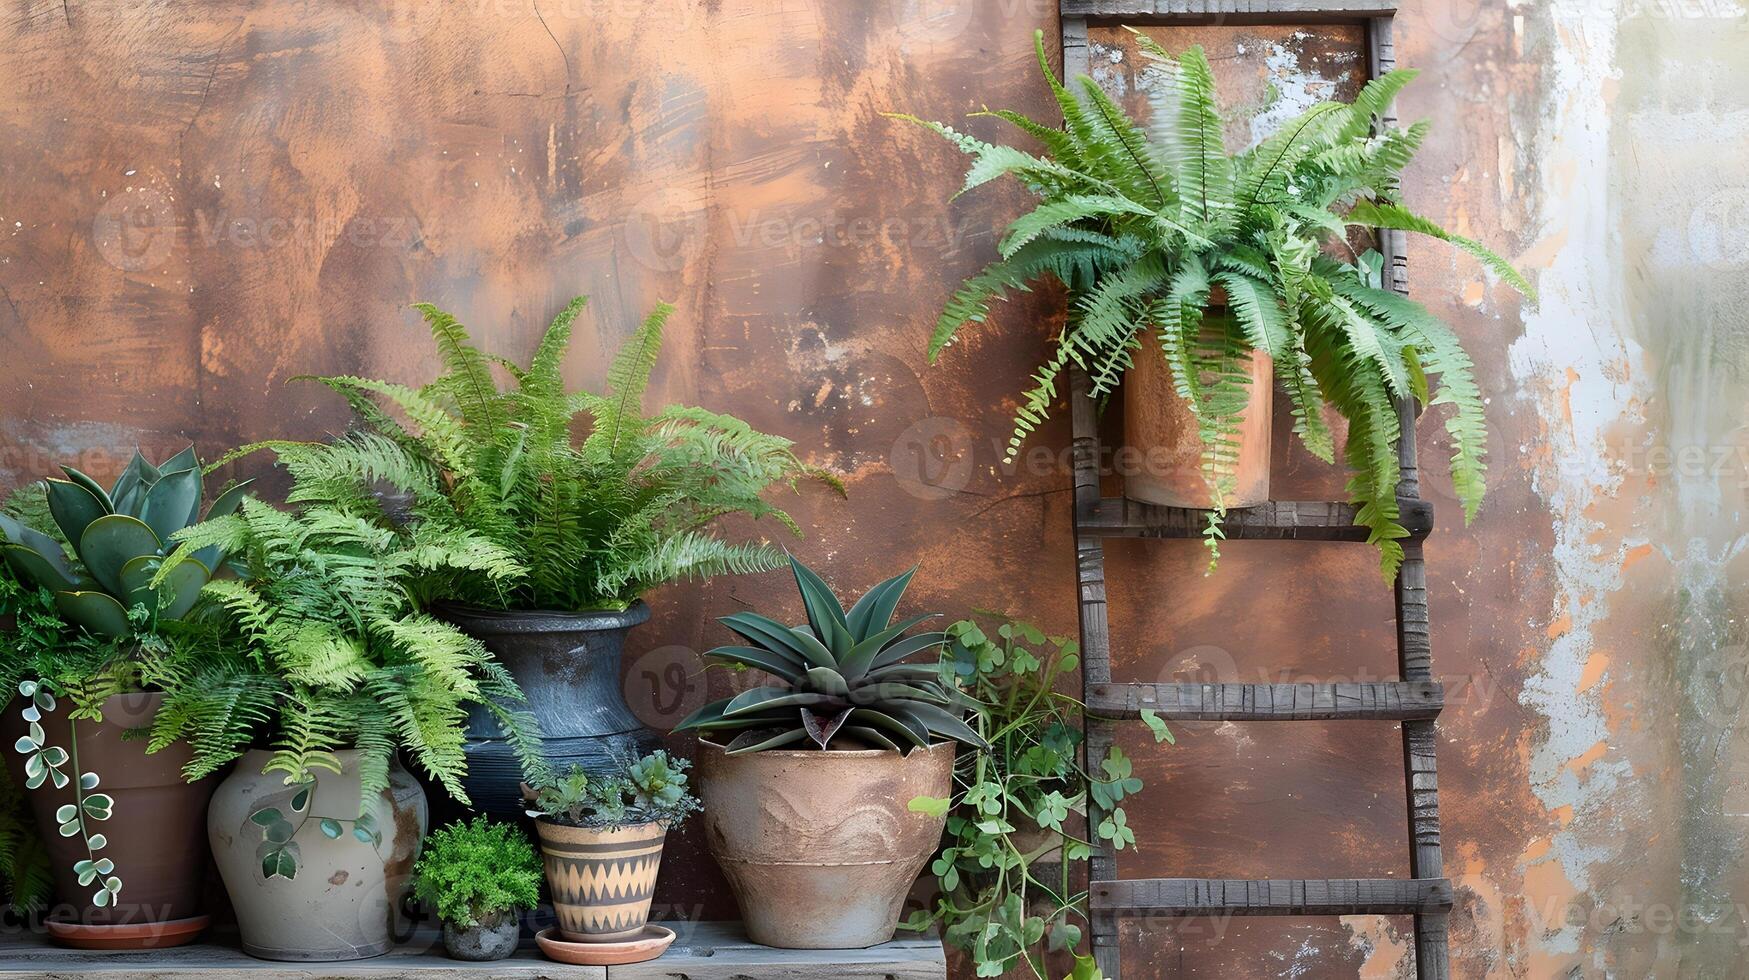 Lush Tropical Foliage and Potted Plants Adorning a Rustic Outdoor Living Space photo